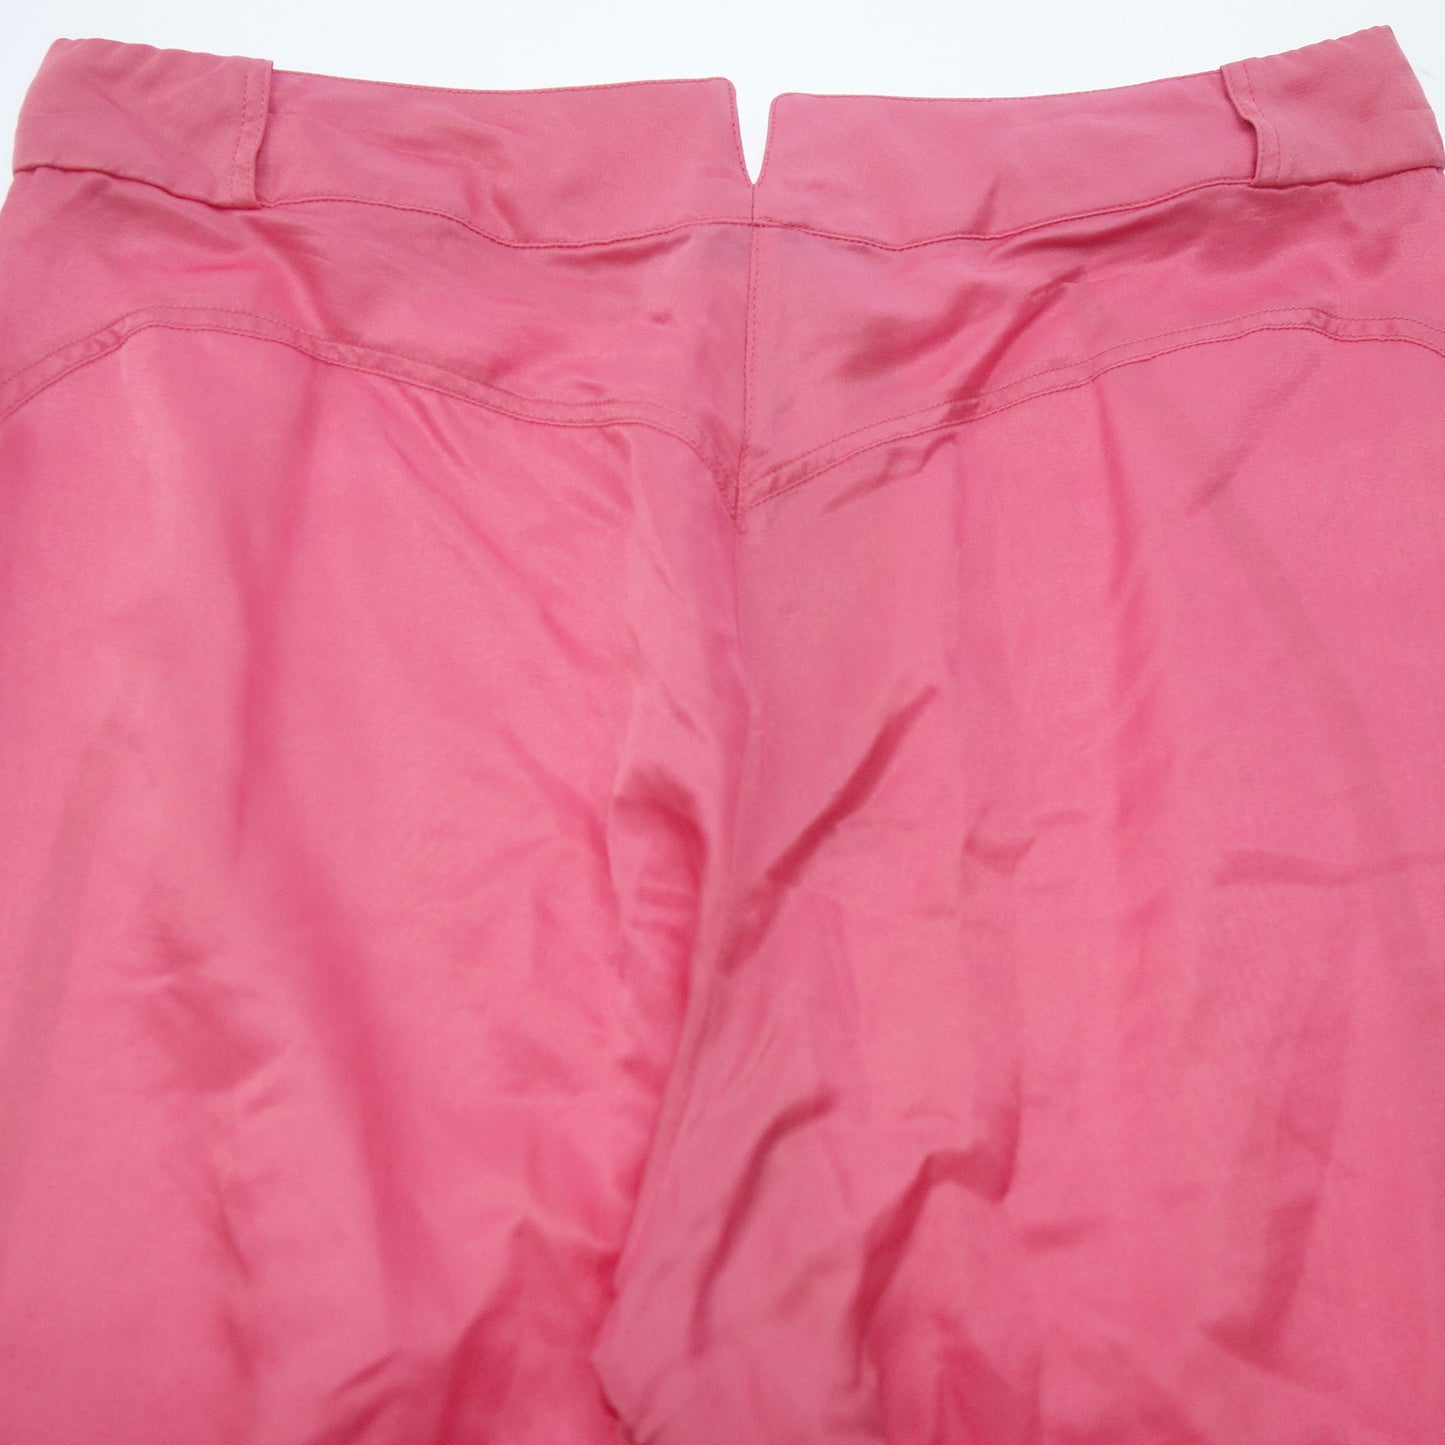 Used ◆CHANEL silk pants here mark P39 size 38 ladies pink CHANEL [AFB25] 